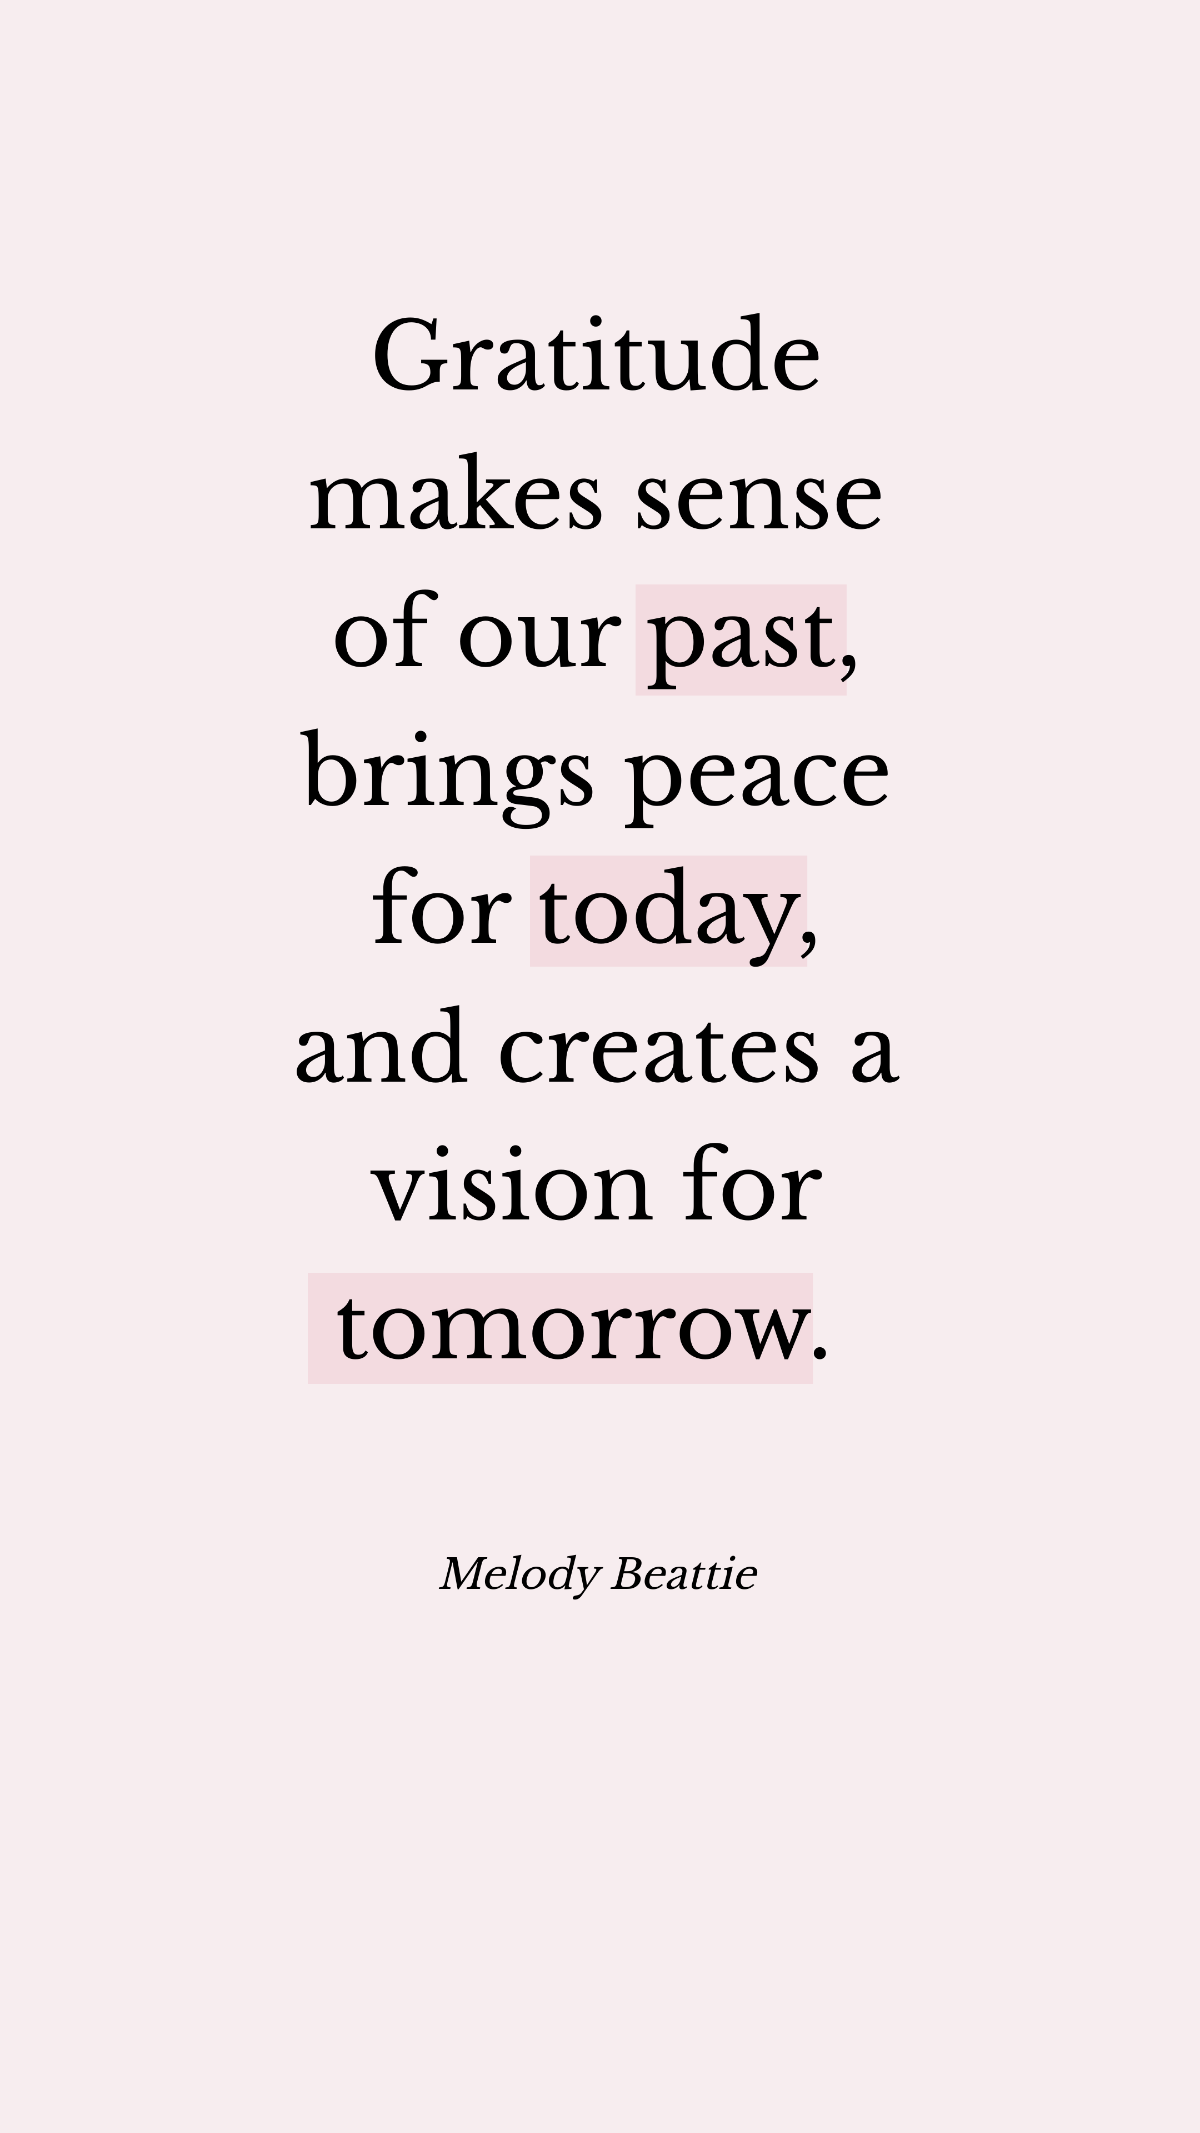 Melody Beattie - Gratitude makes sense of our past, brings peace for today, and creates a vision for tomorrow. Template